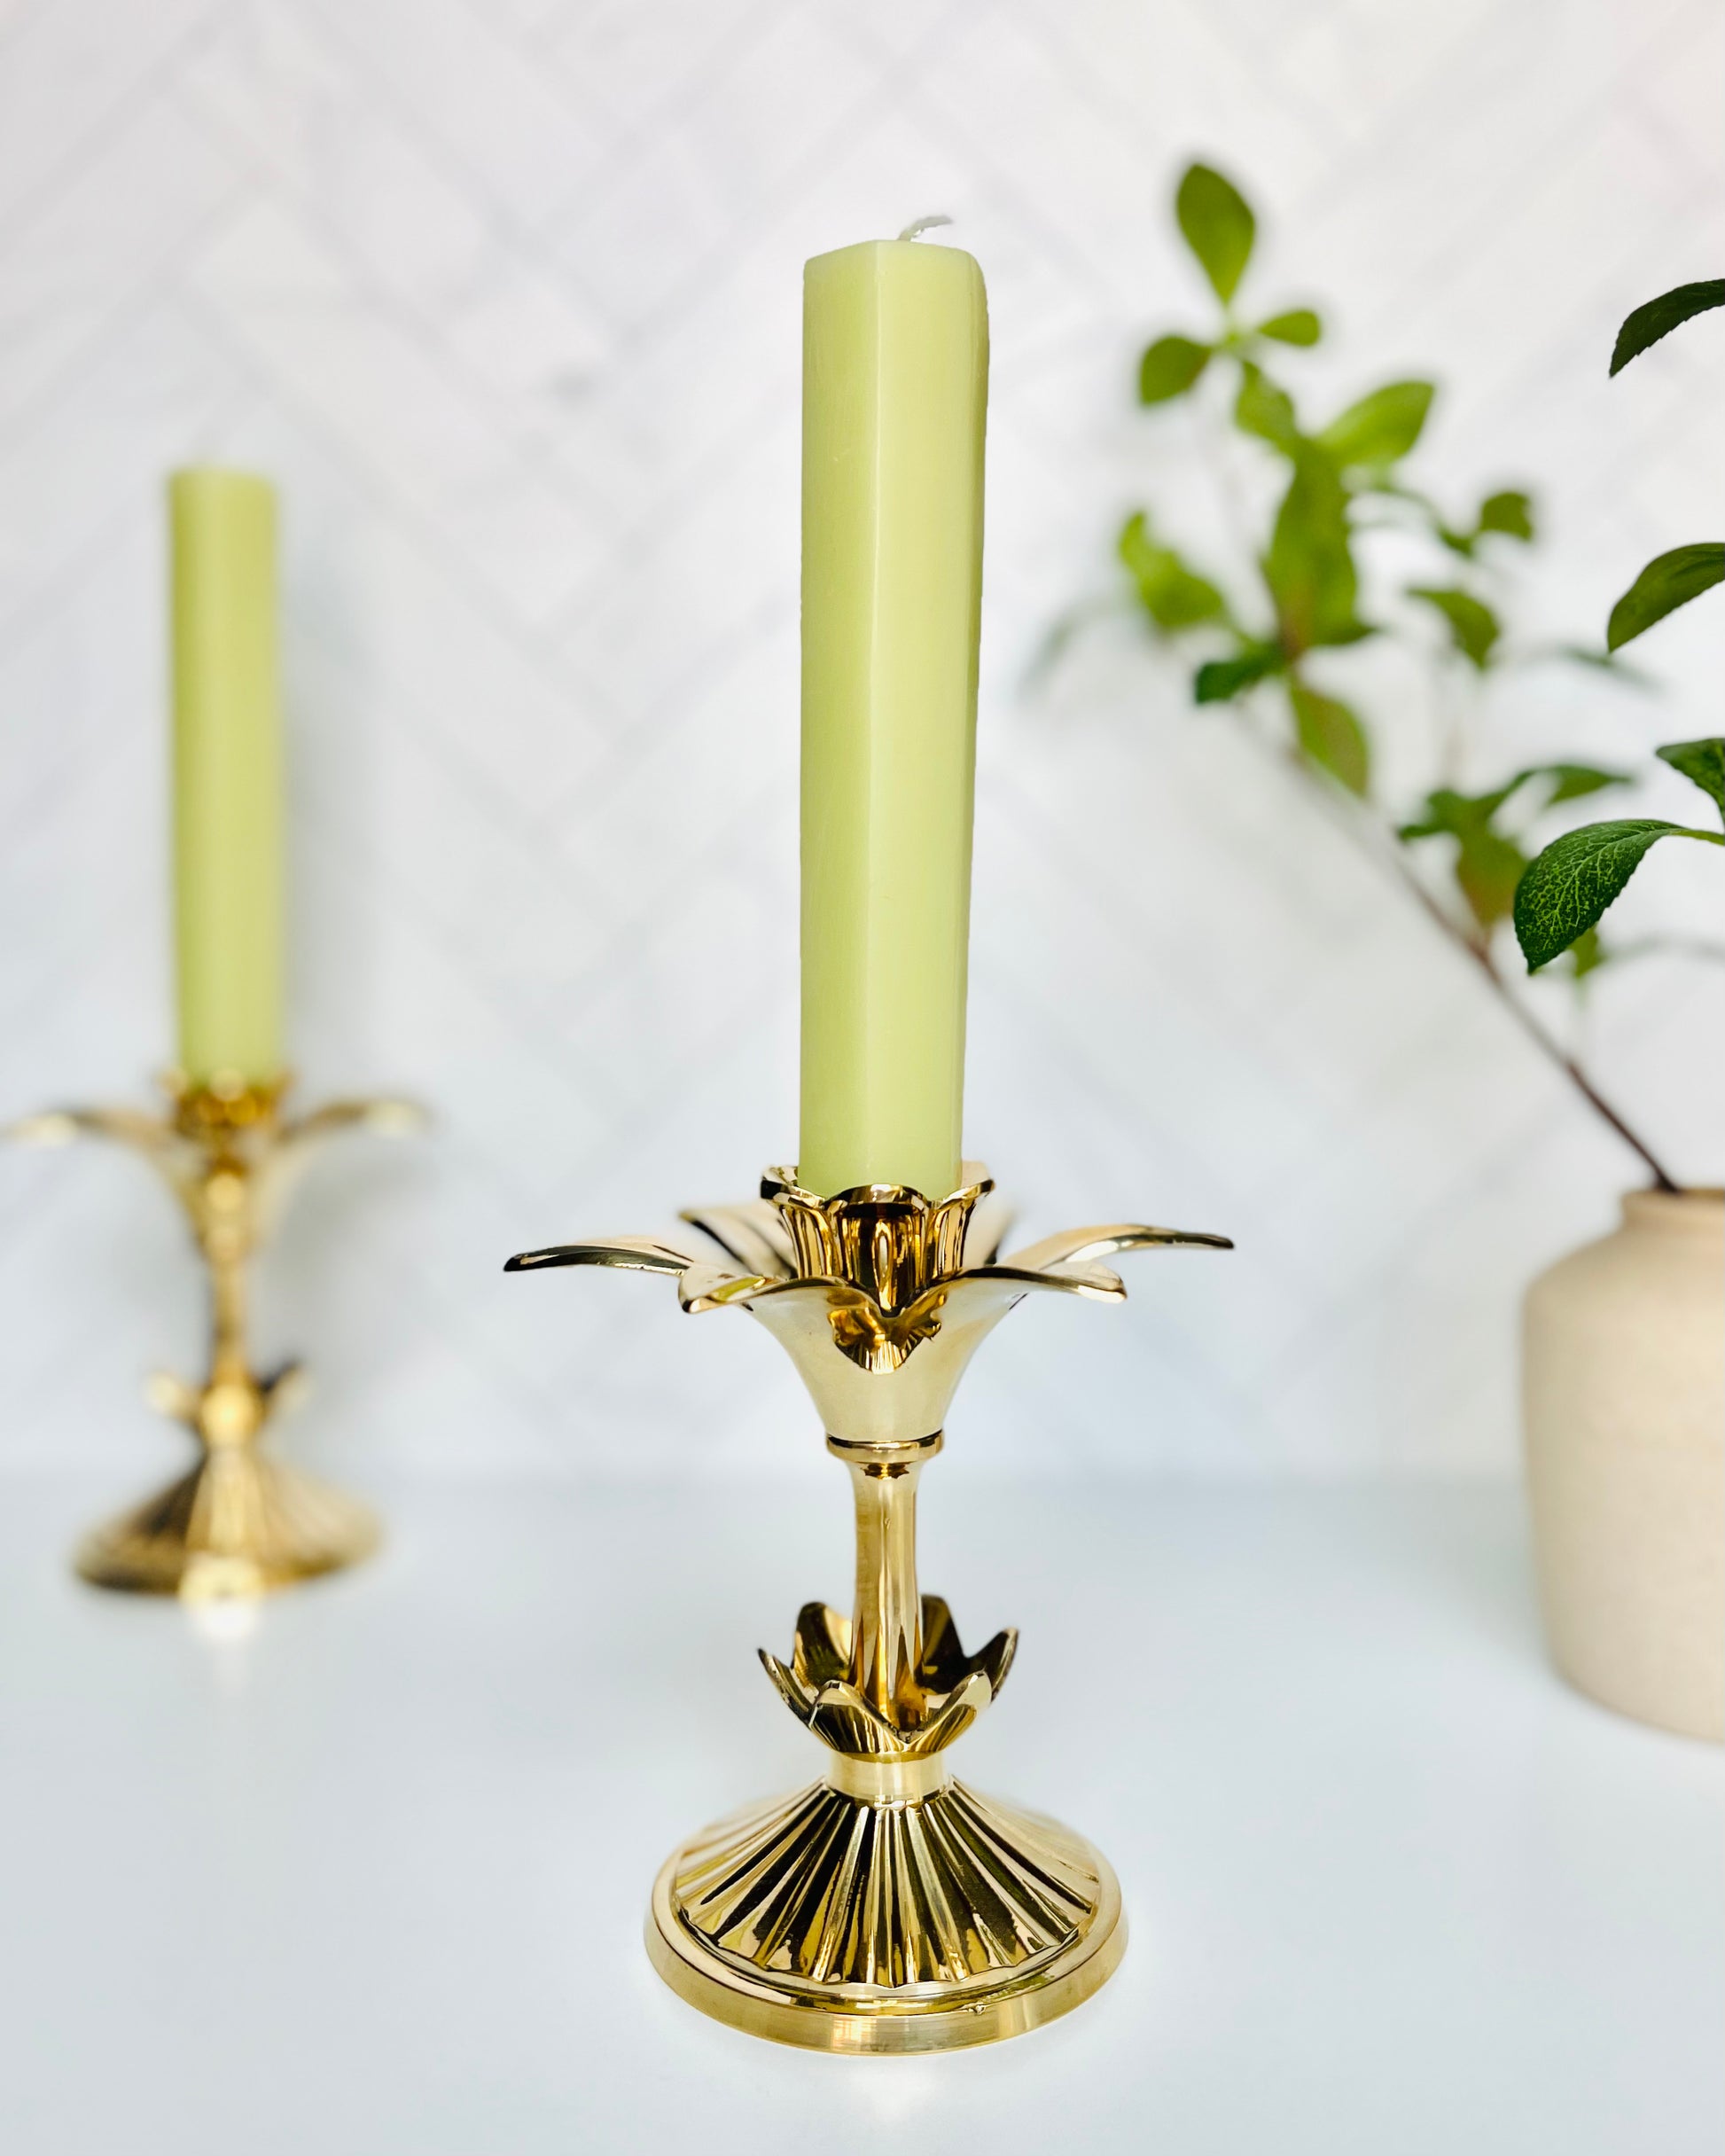 A melon taper candle in a golden flower candlestick with another one in the background along with a vase filled with greenery